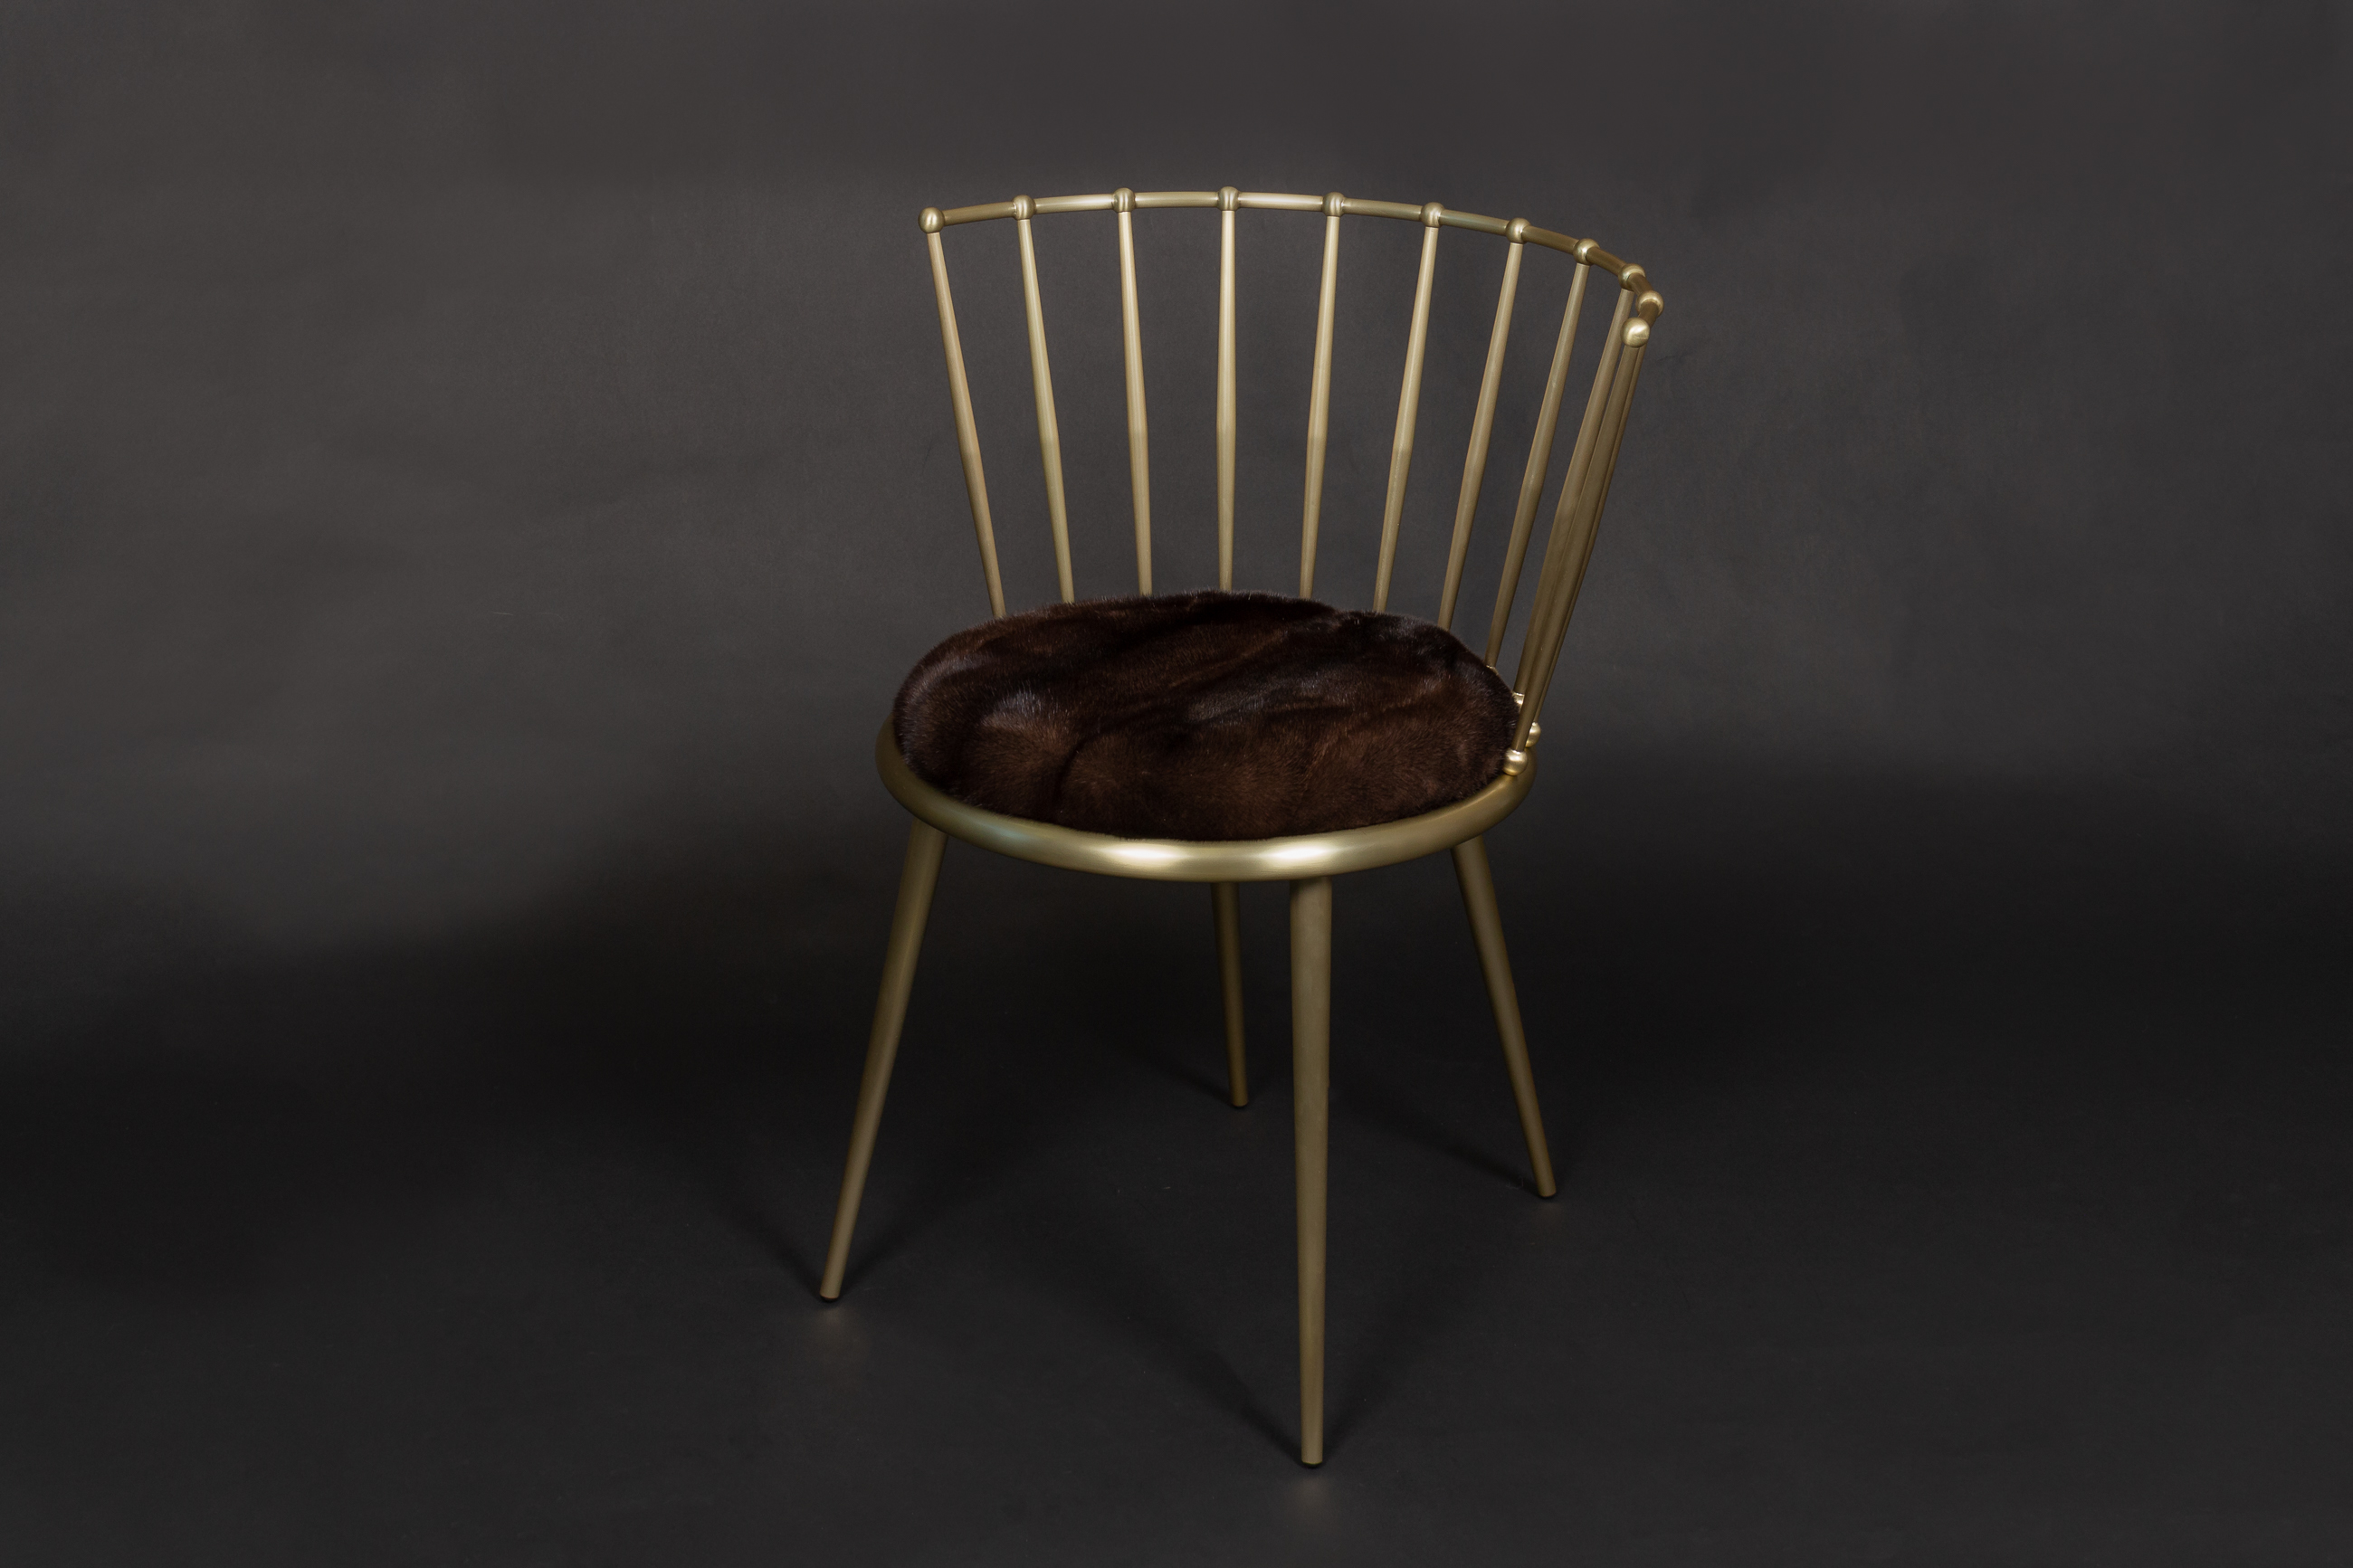 Mink Chair with Mahogany Mink Skins